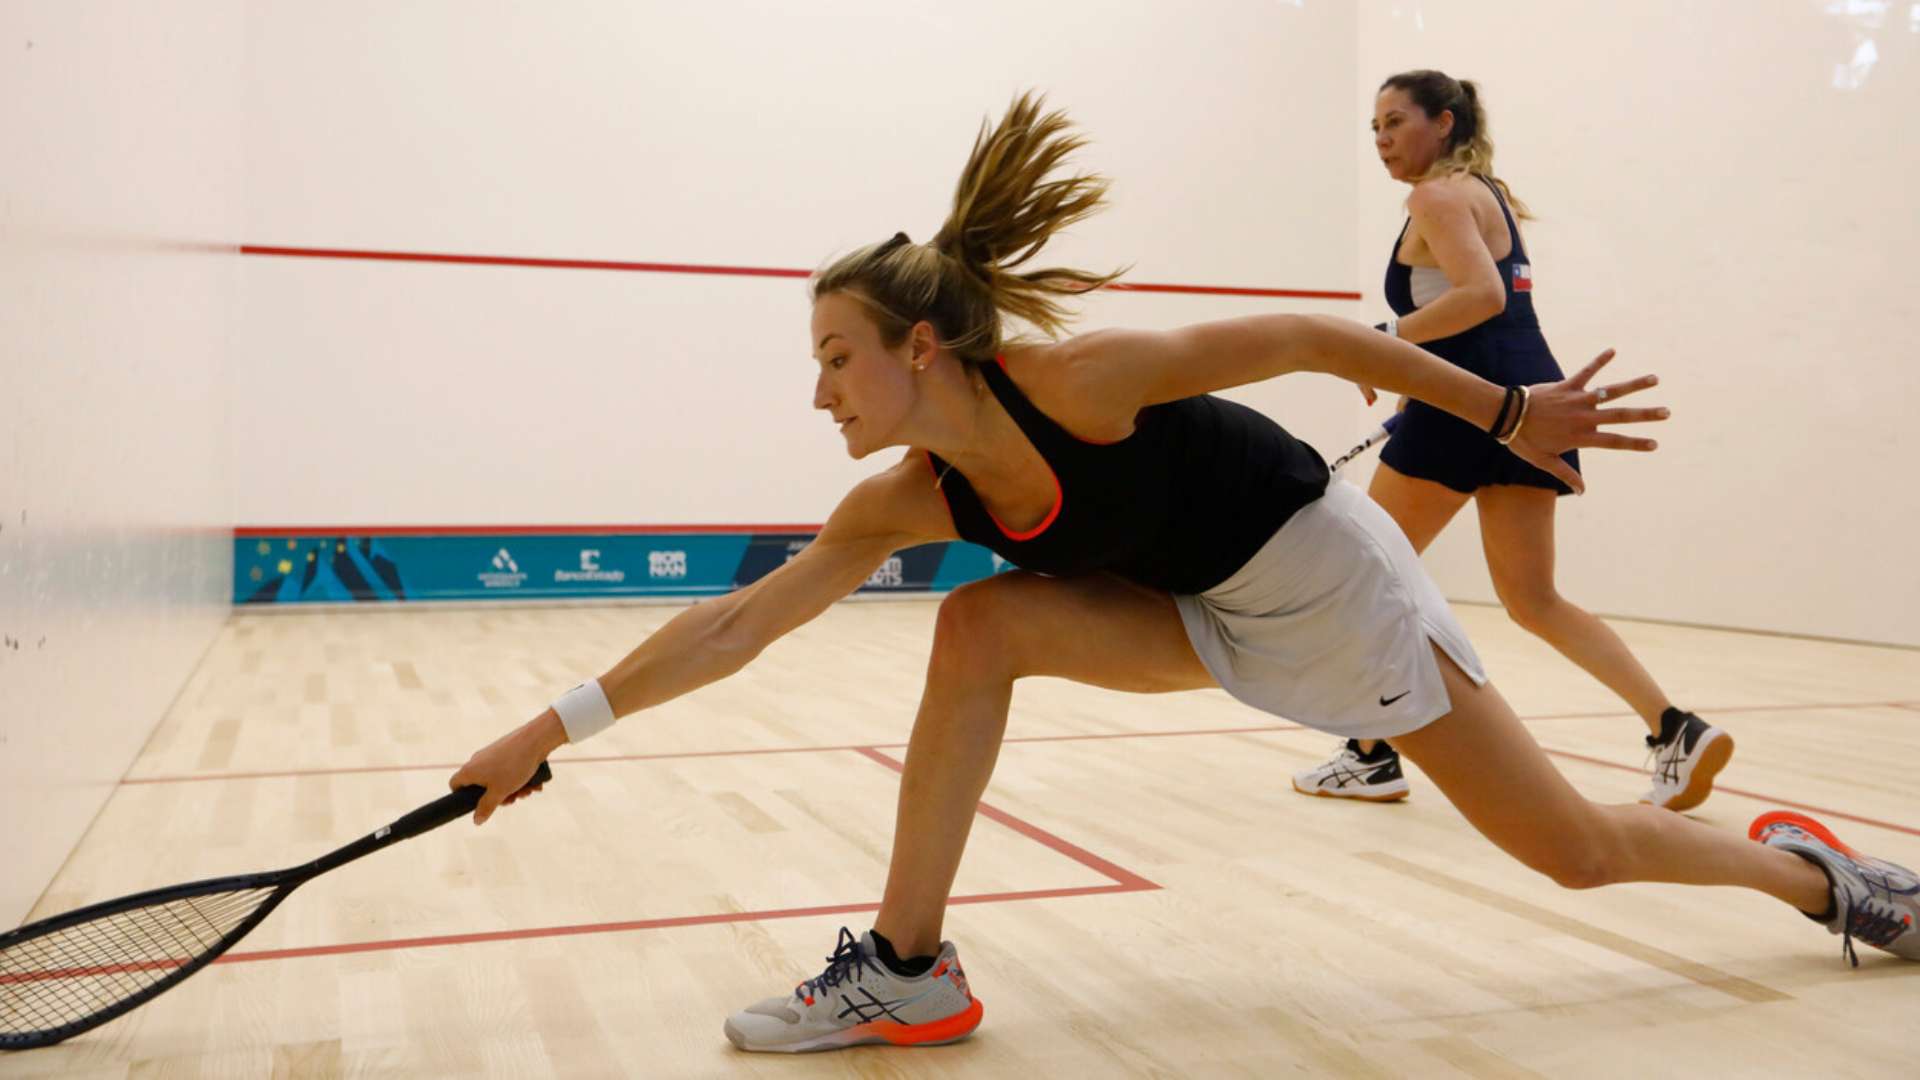 Squash determines its semifinalists in male's and female's events